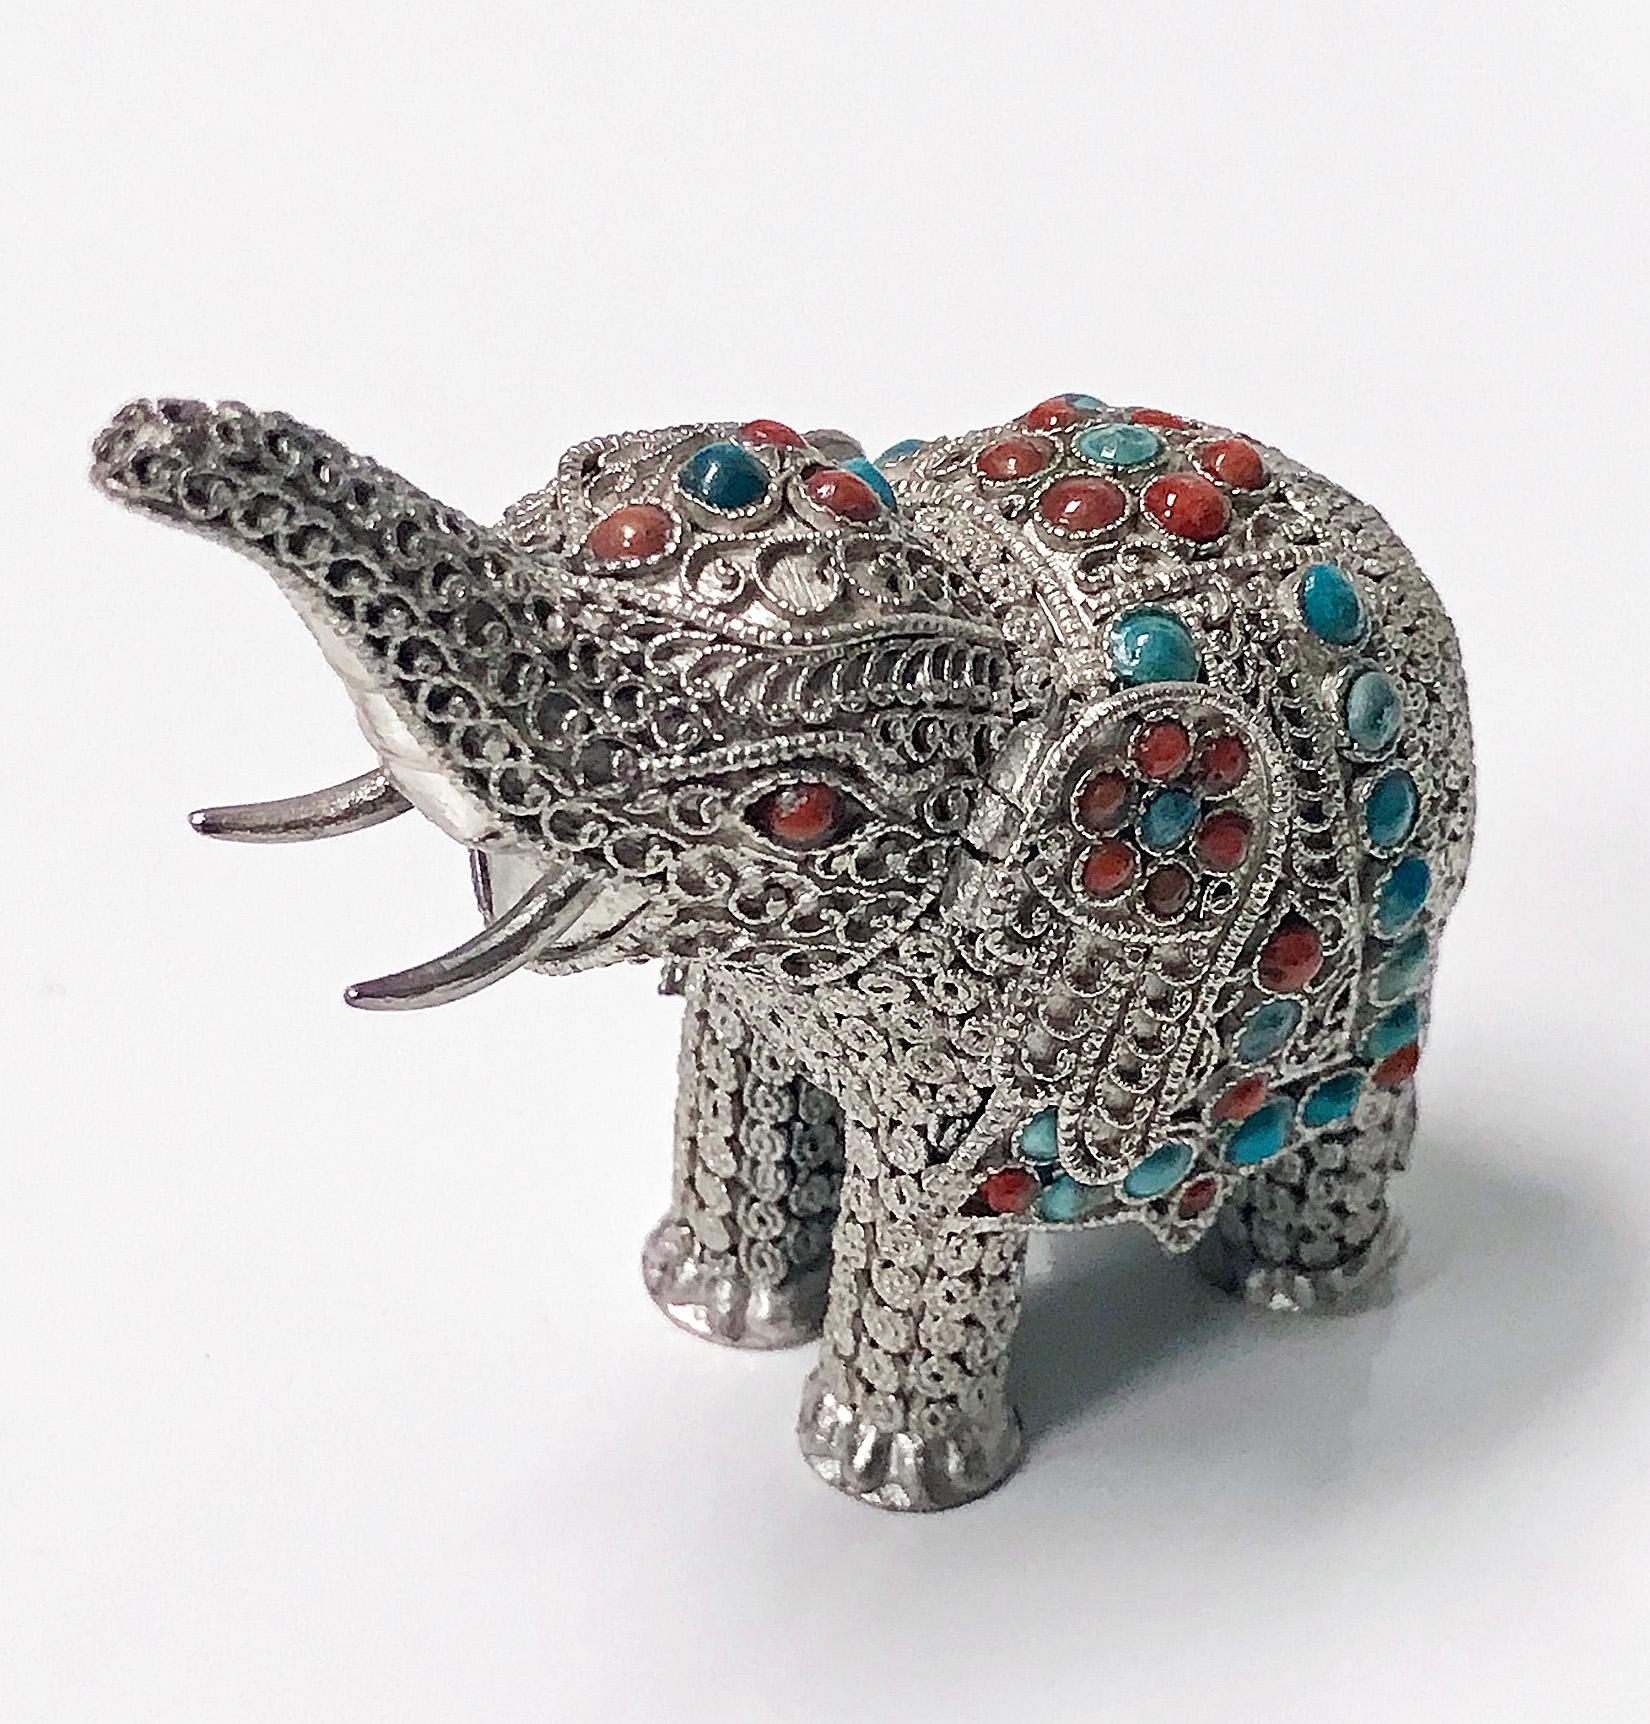 925 sterling silver and multi-color stone inlay 'lucky’ elephant with upturned trunk, probably Chinese, circa 1950. The elephant is highly detailed with a fine silver wire work filigree body, inset with stones. The silver set with numerous coral and